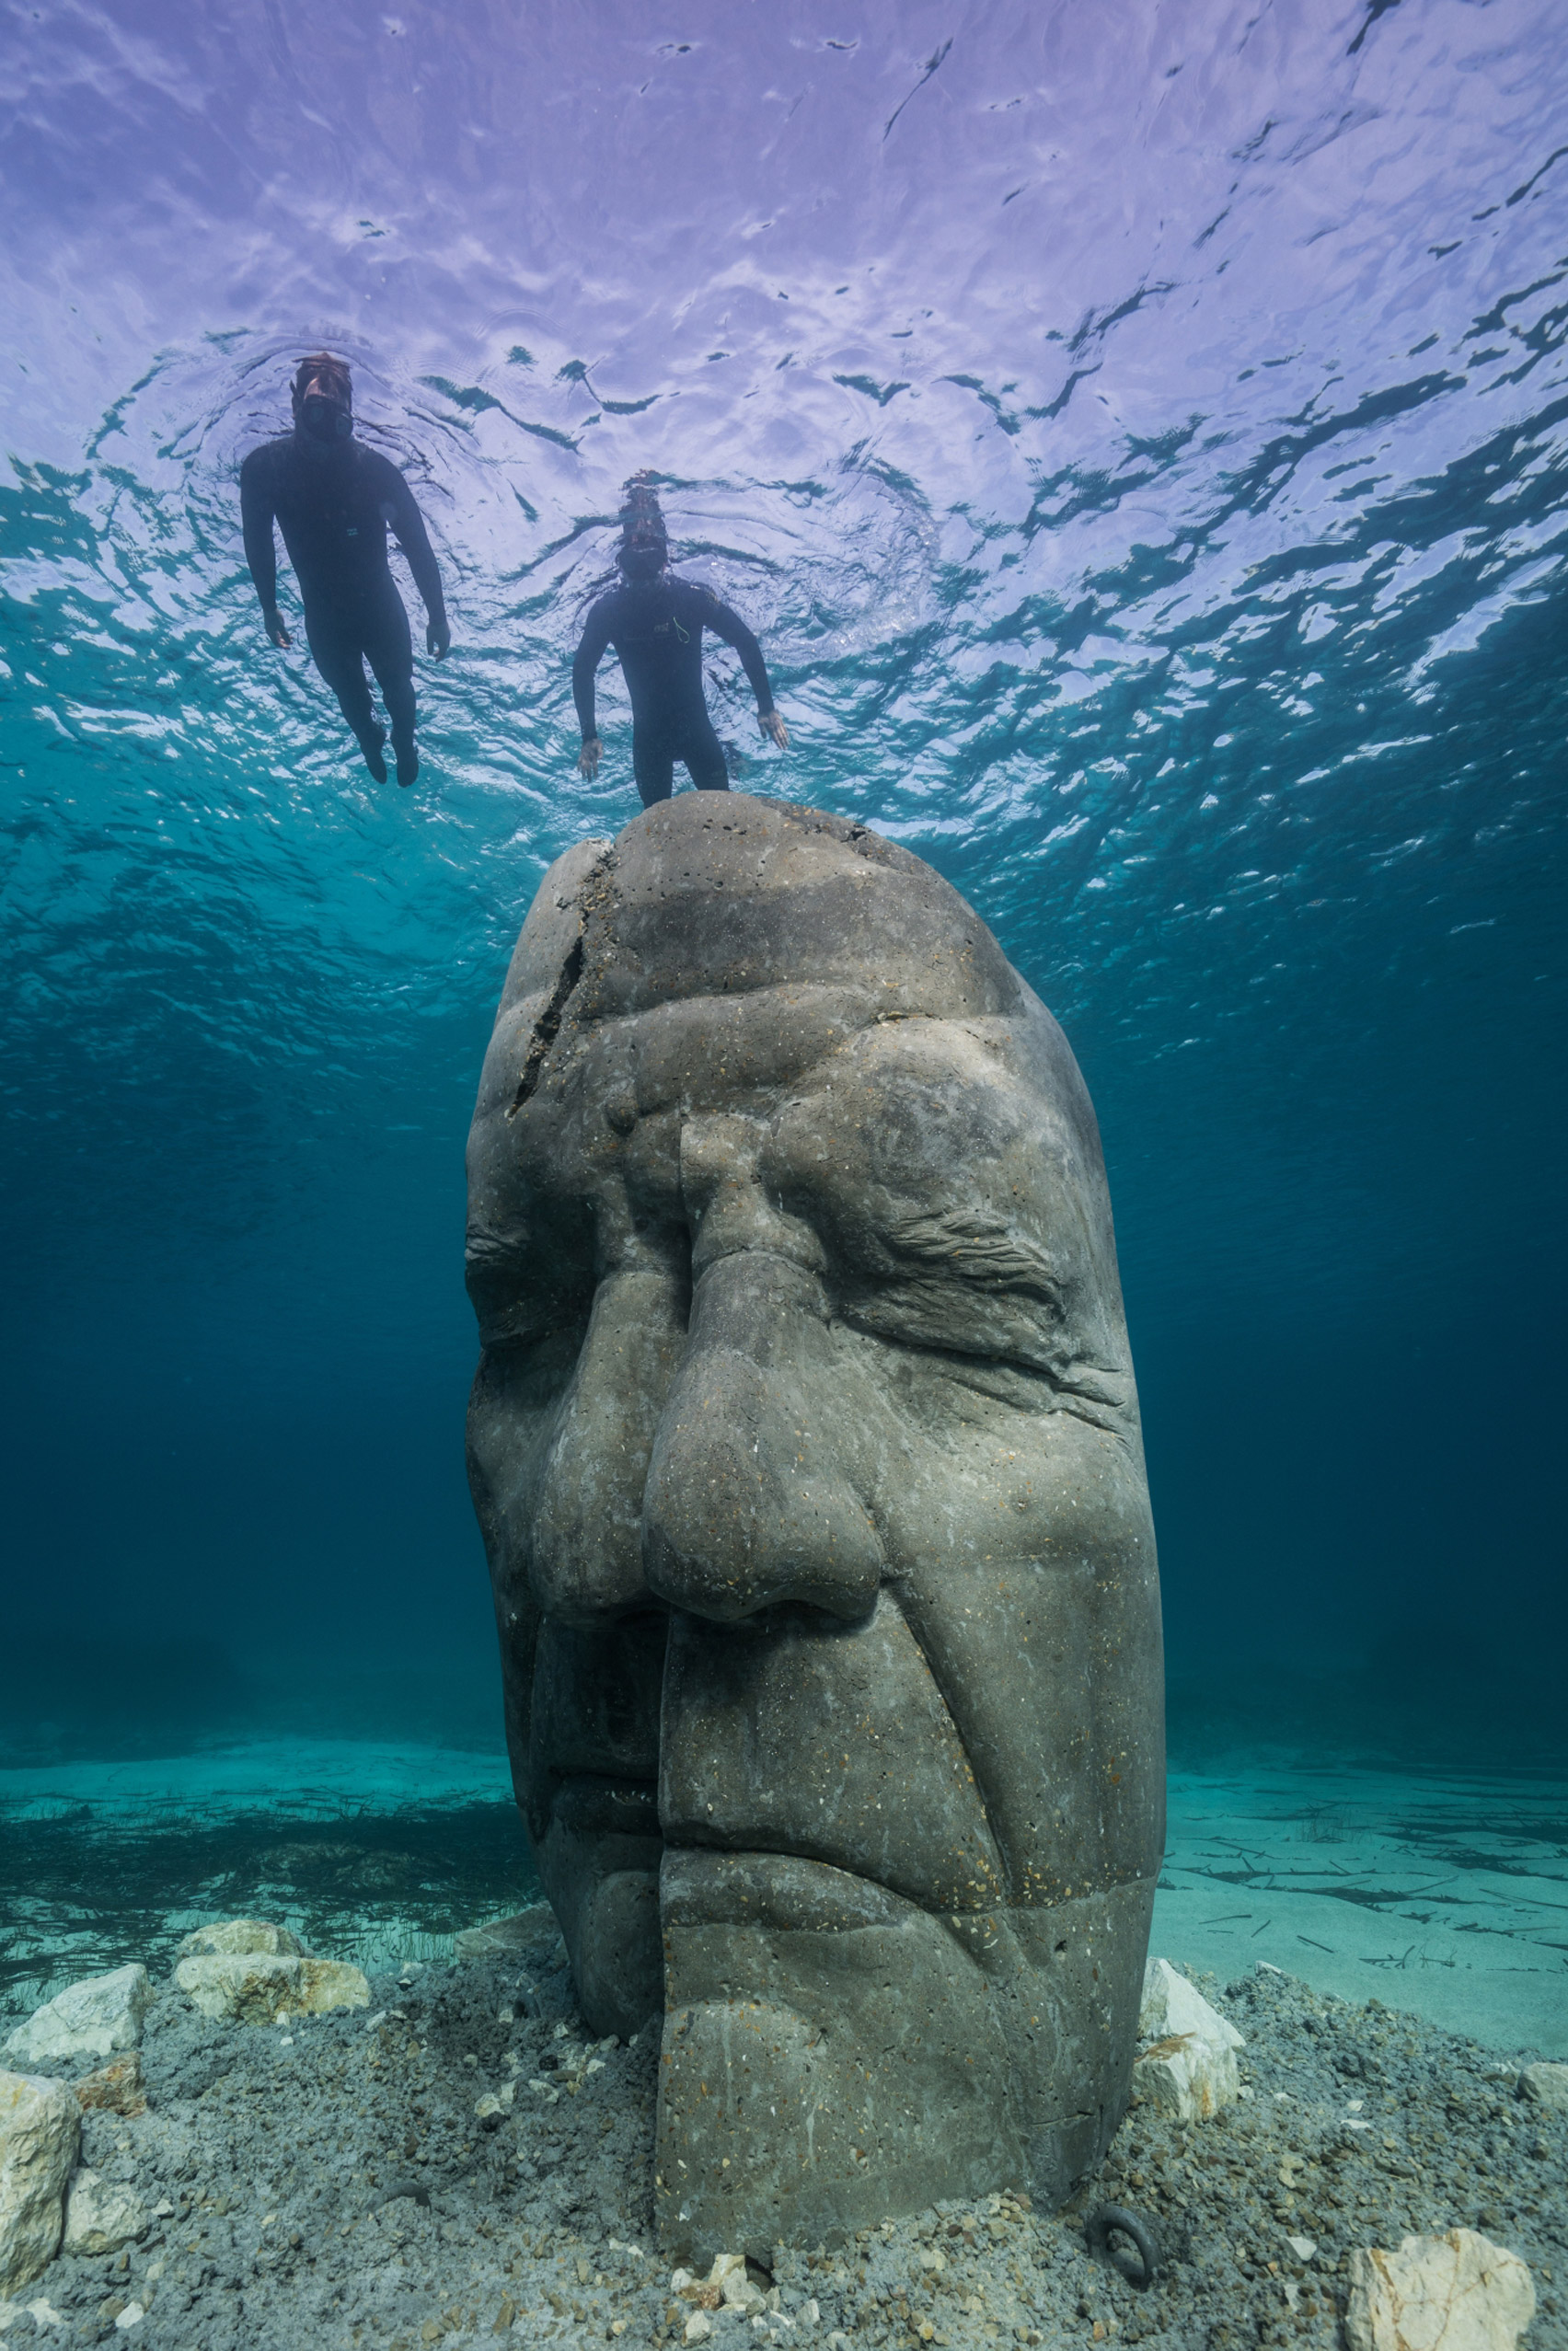 Two snorkelers observing an underwater sculpture of a human face